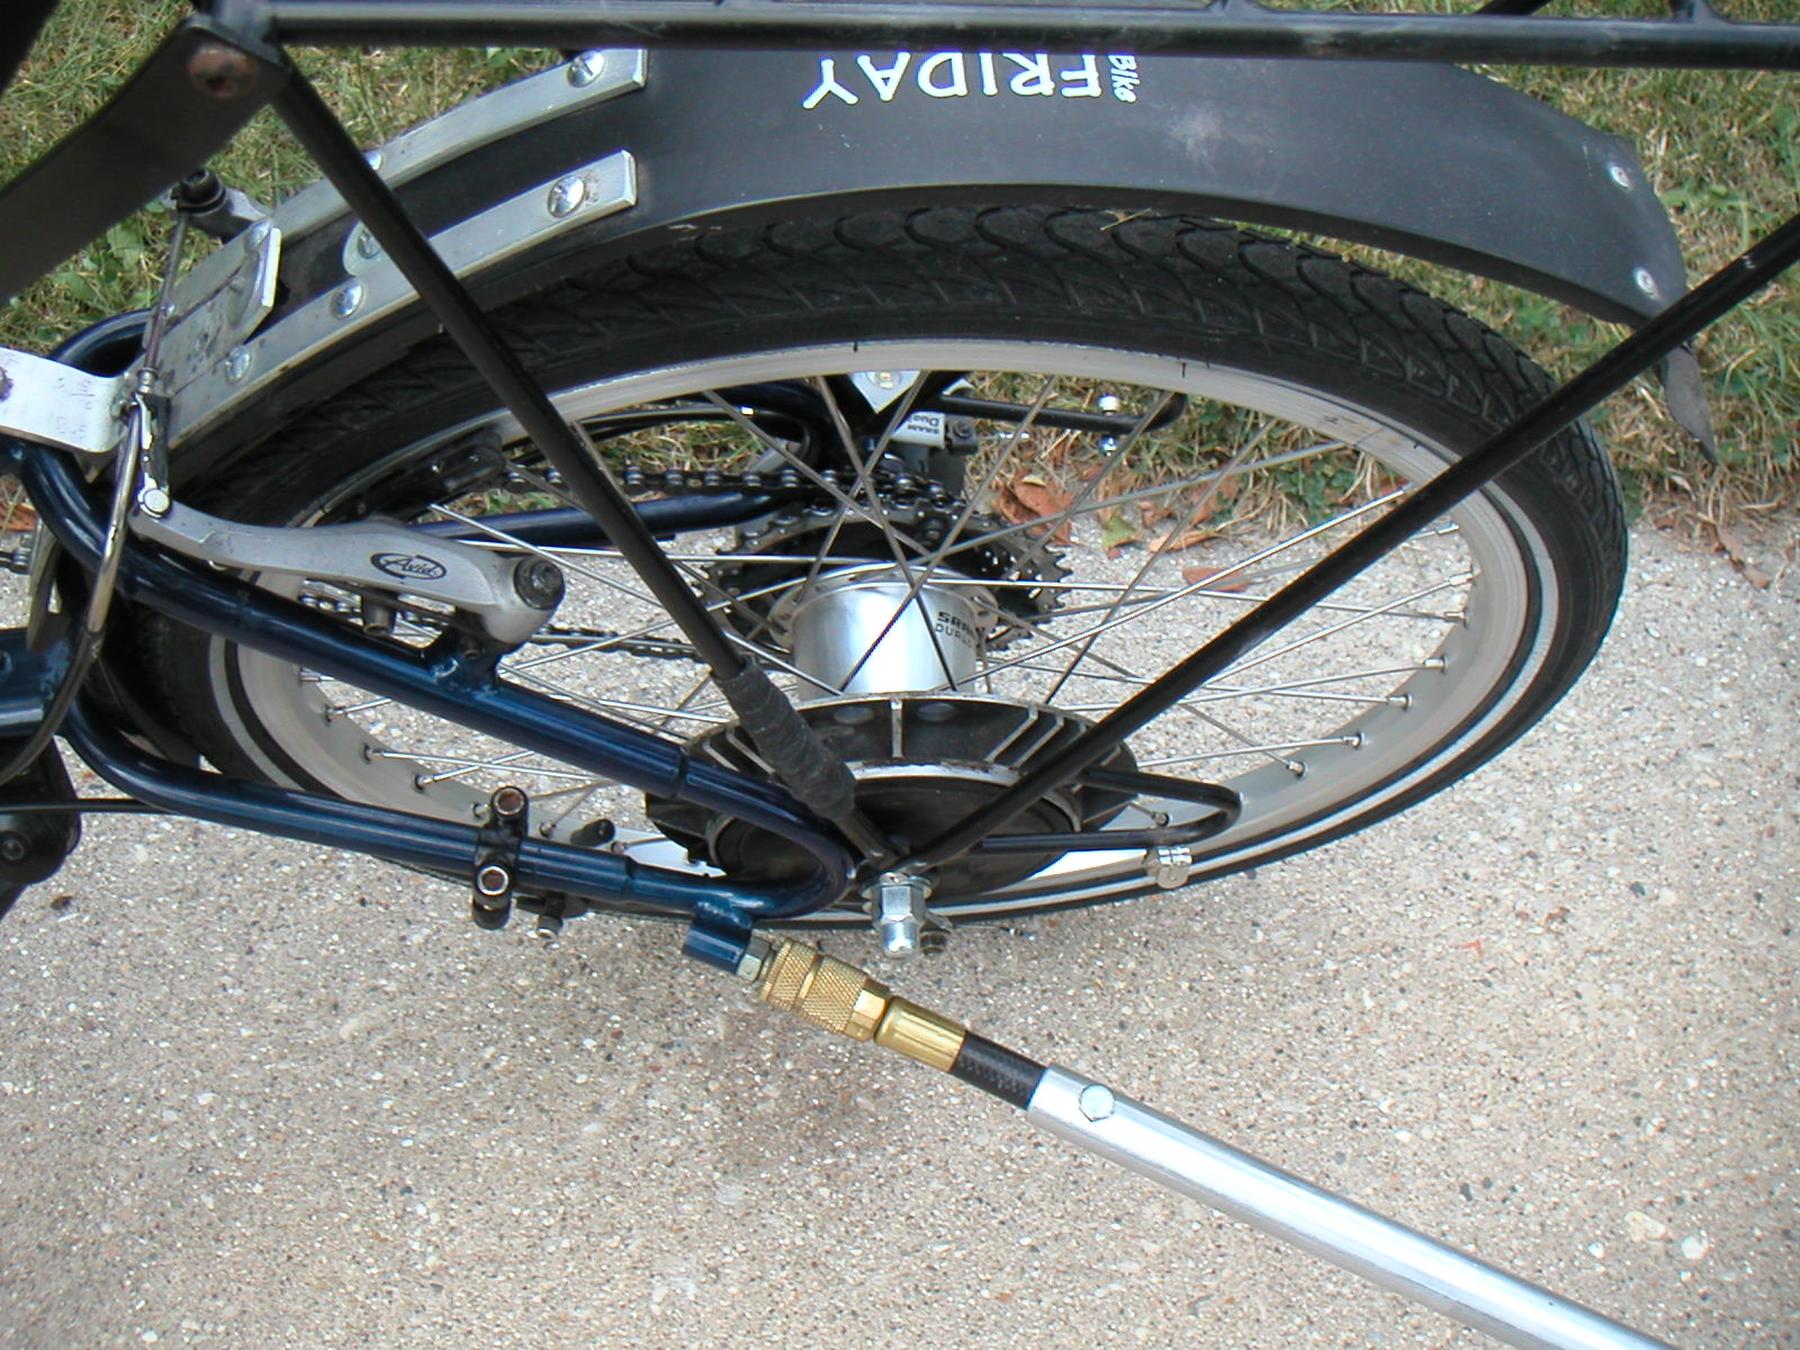 File:Bike Friday DoubleDay folding recumbent tandem bicycle trailer attachment.jpg - a bike with a t